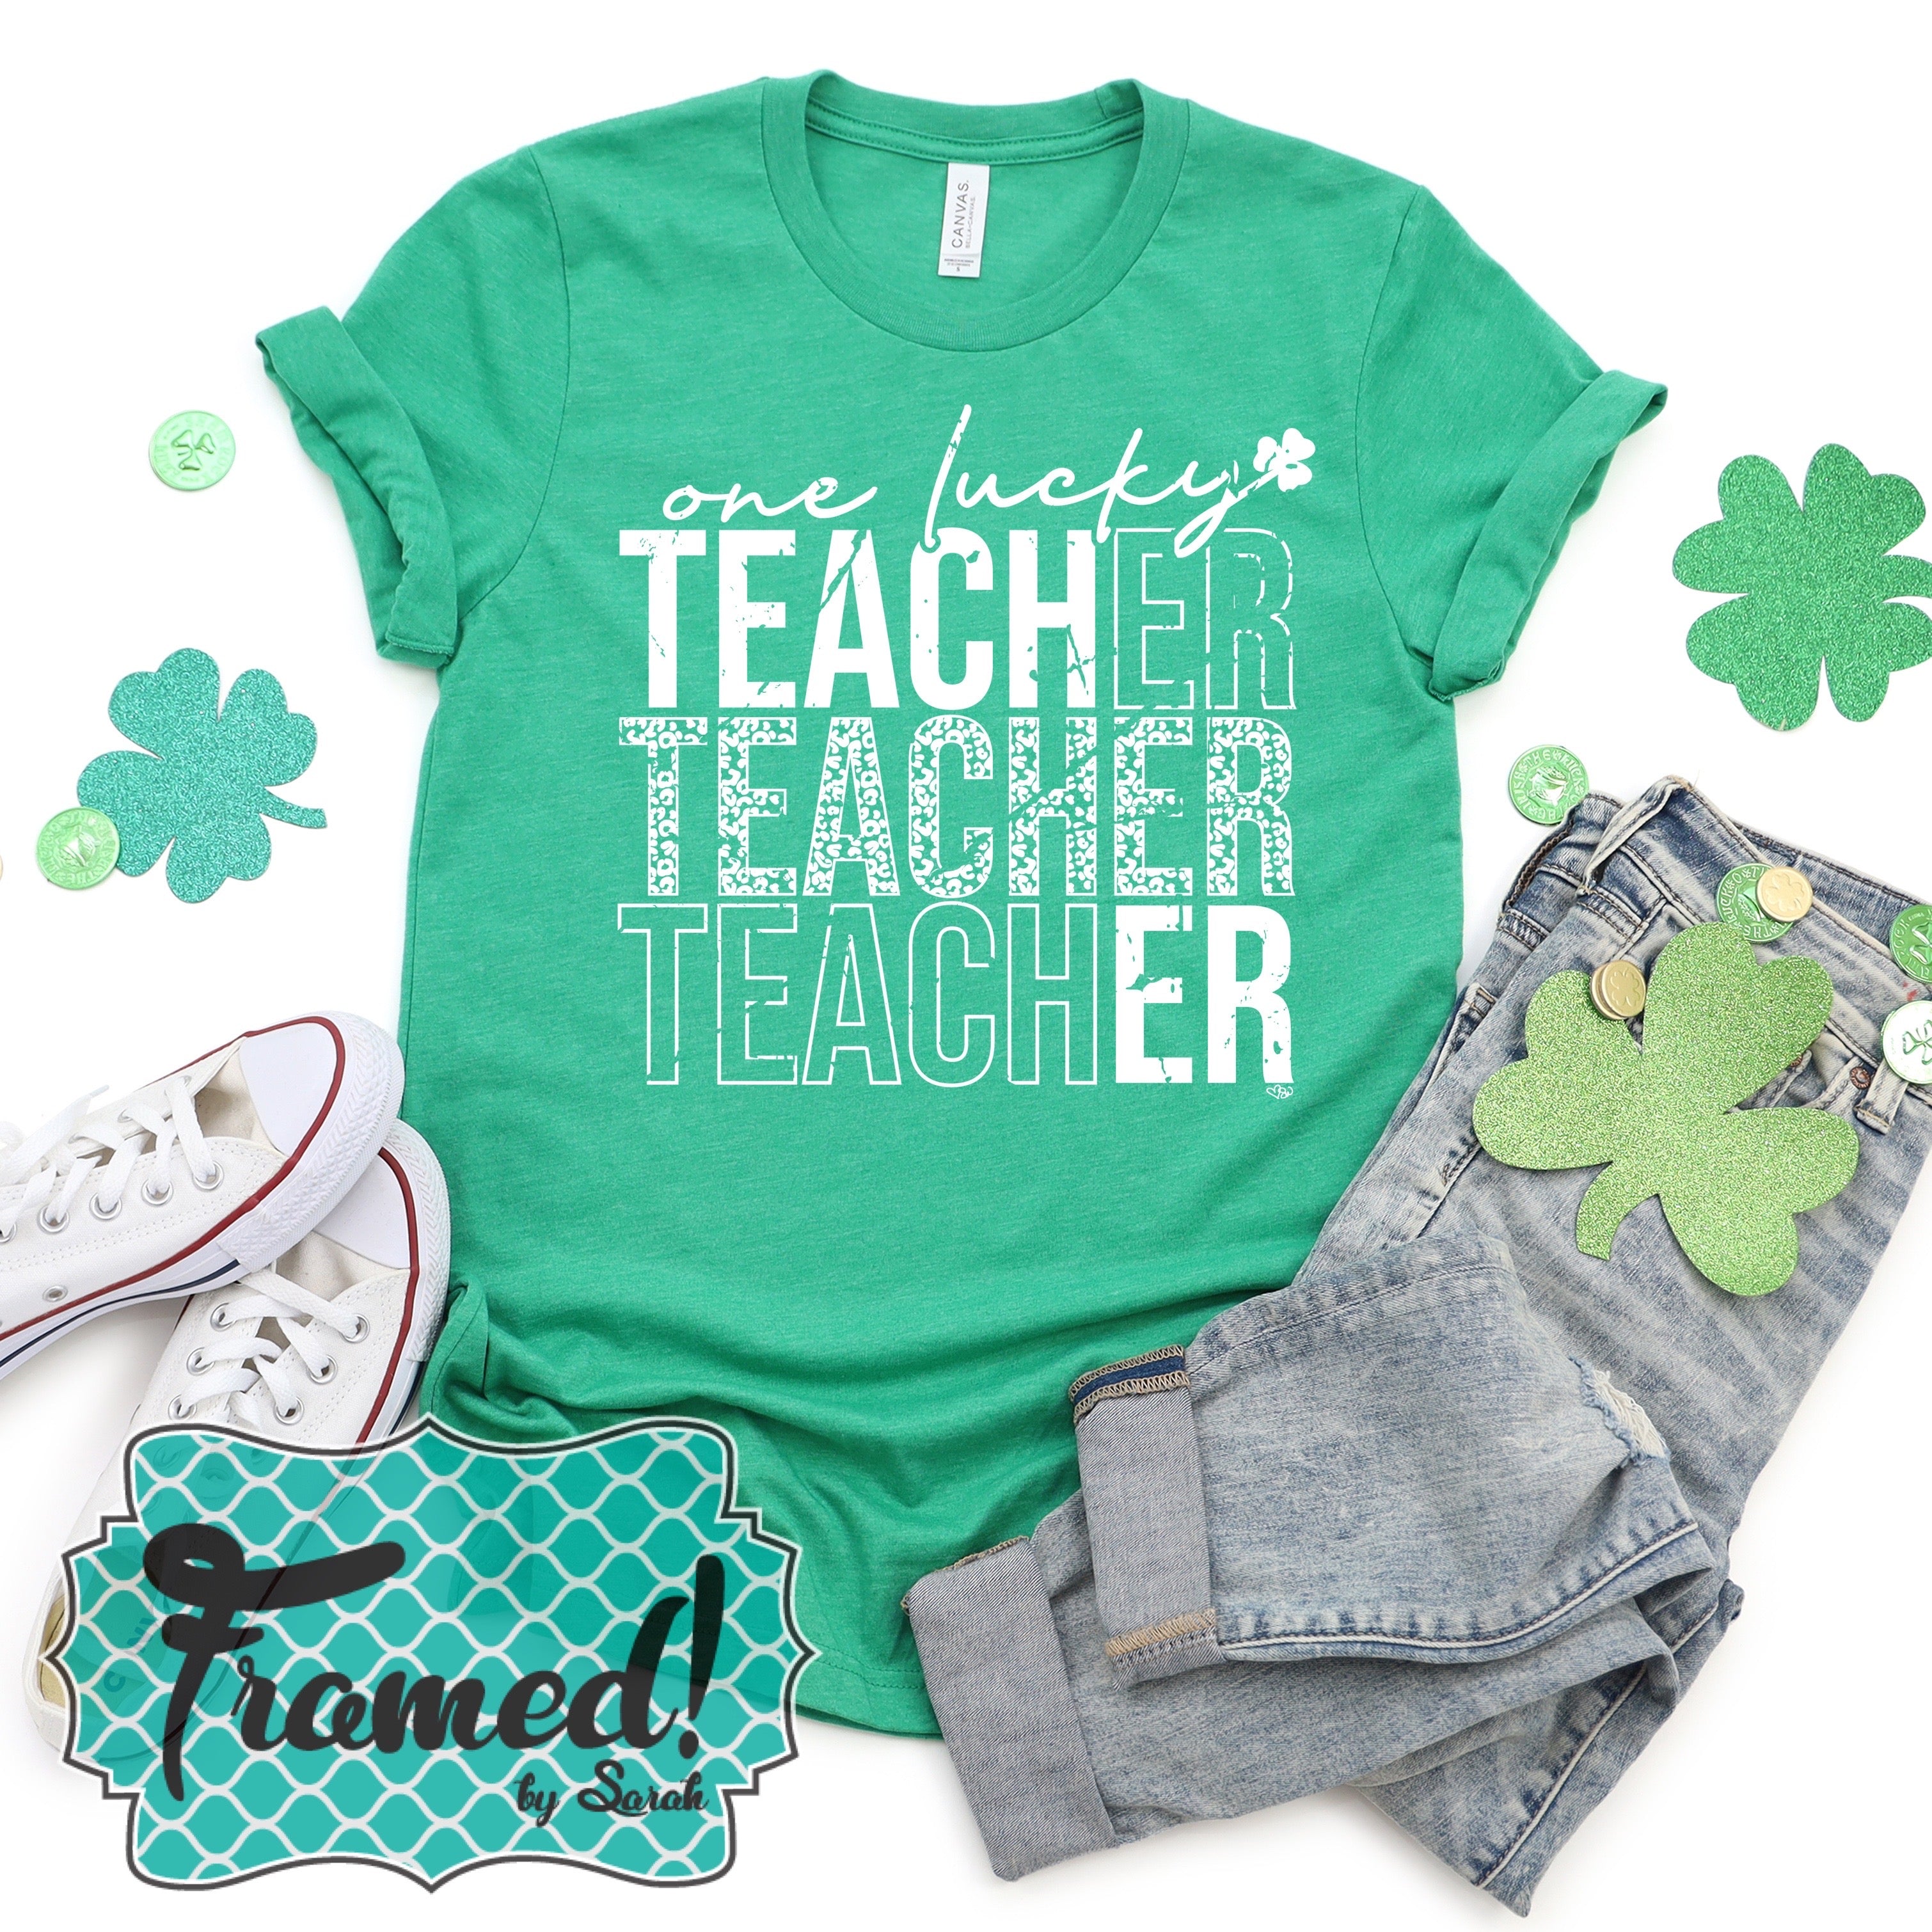 Green 'One Lucky Teacher' Tee (Large only)